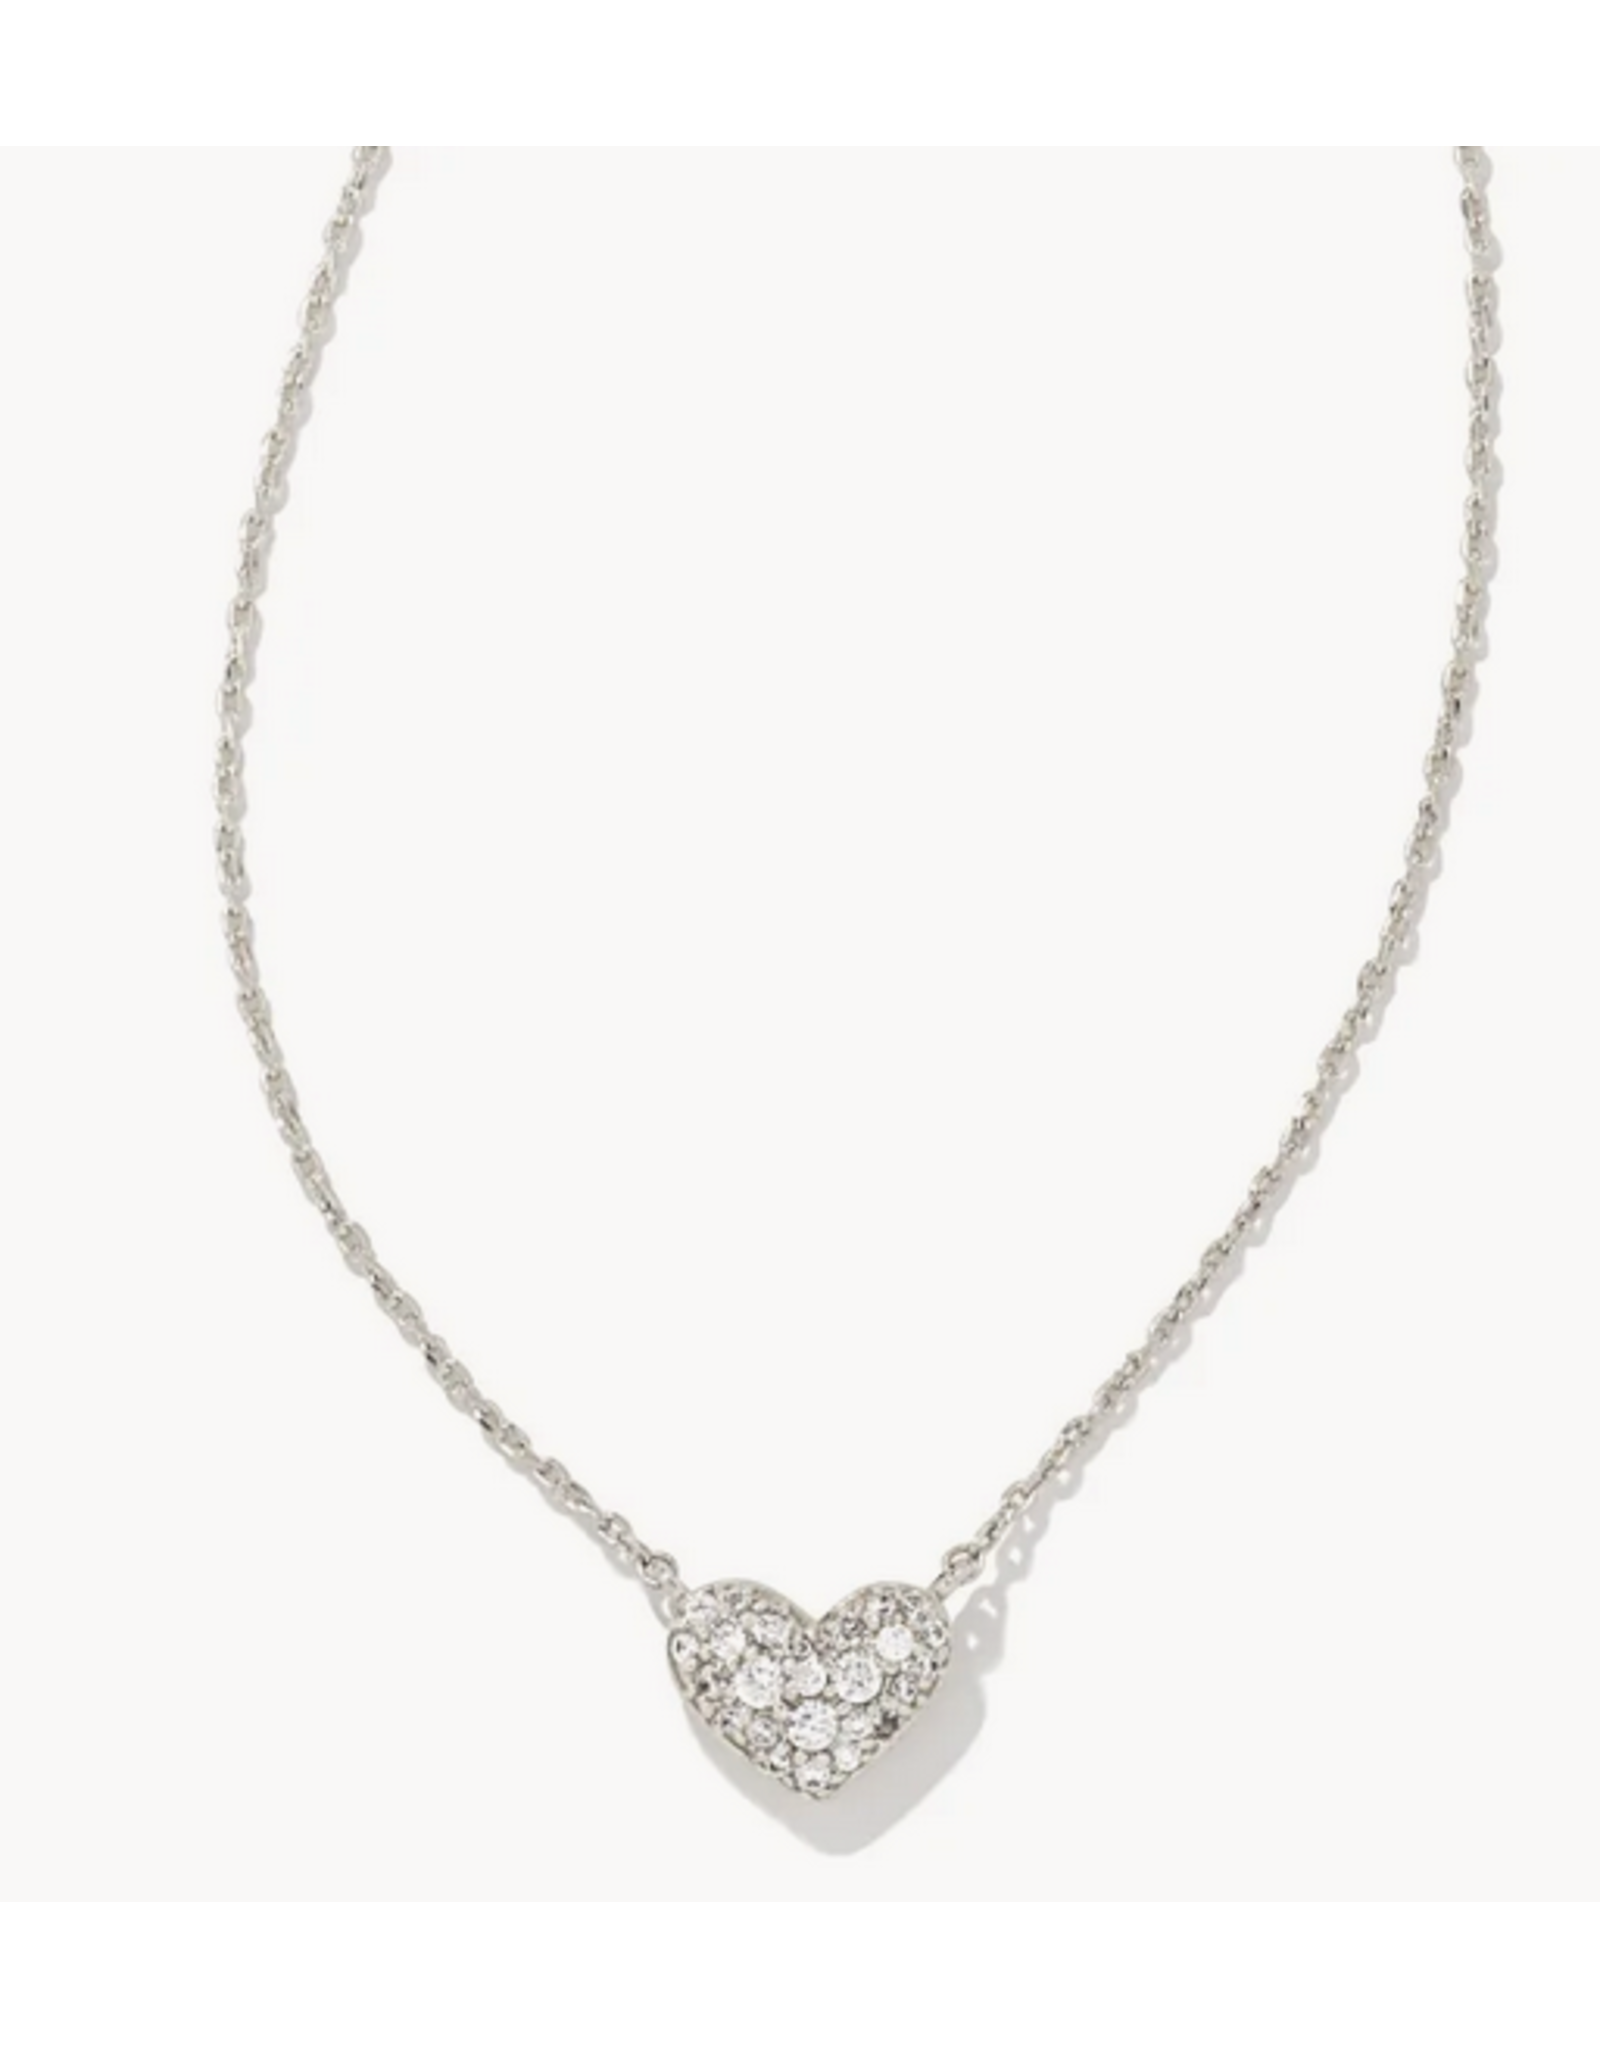 Kendra Scott Ari Silver Pave Crystal Heart Necklace in White Crystal